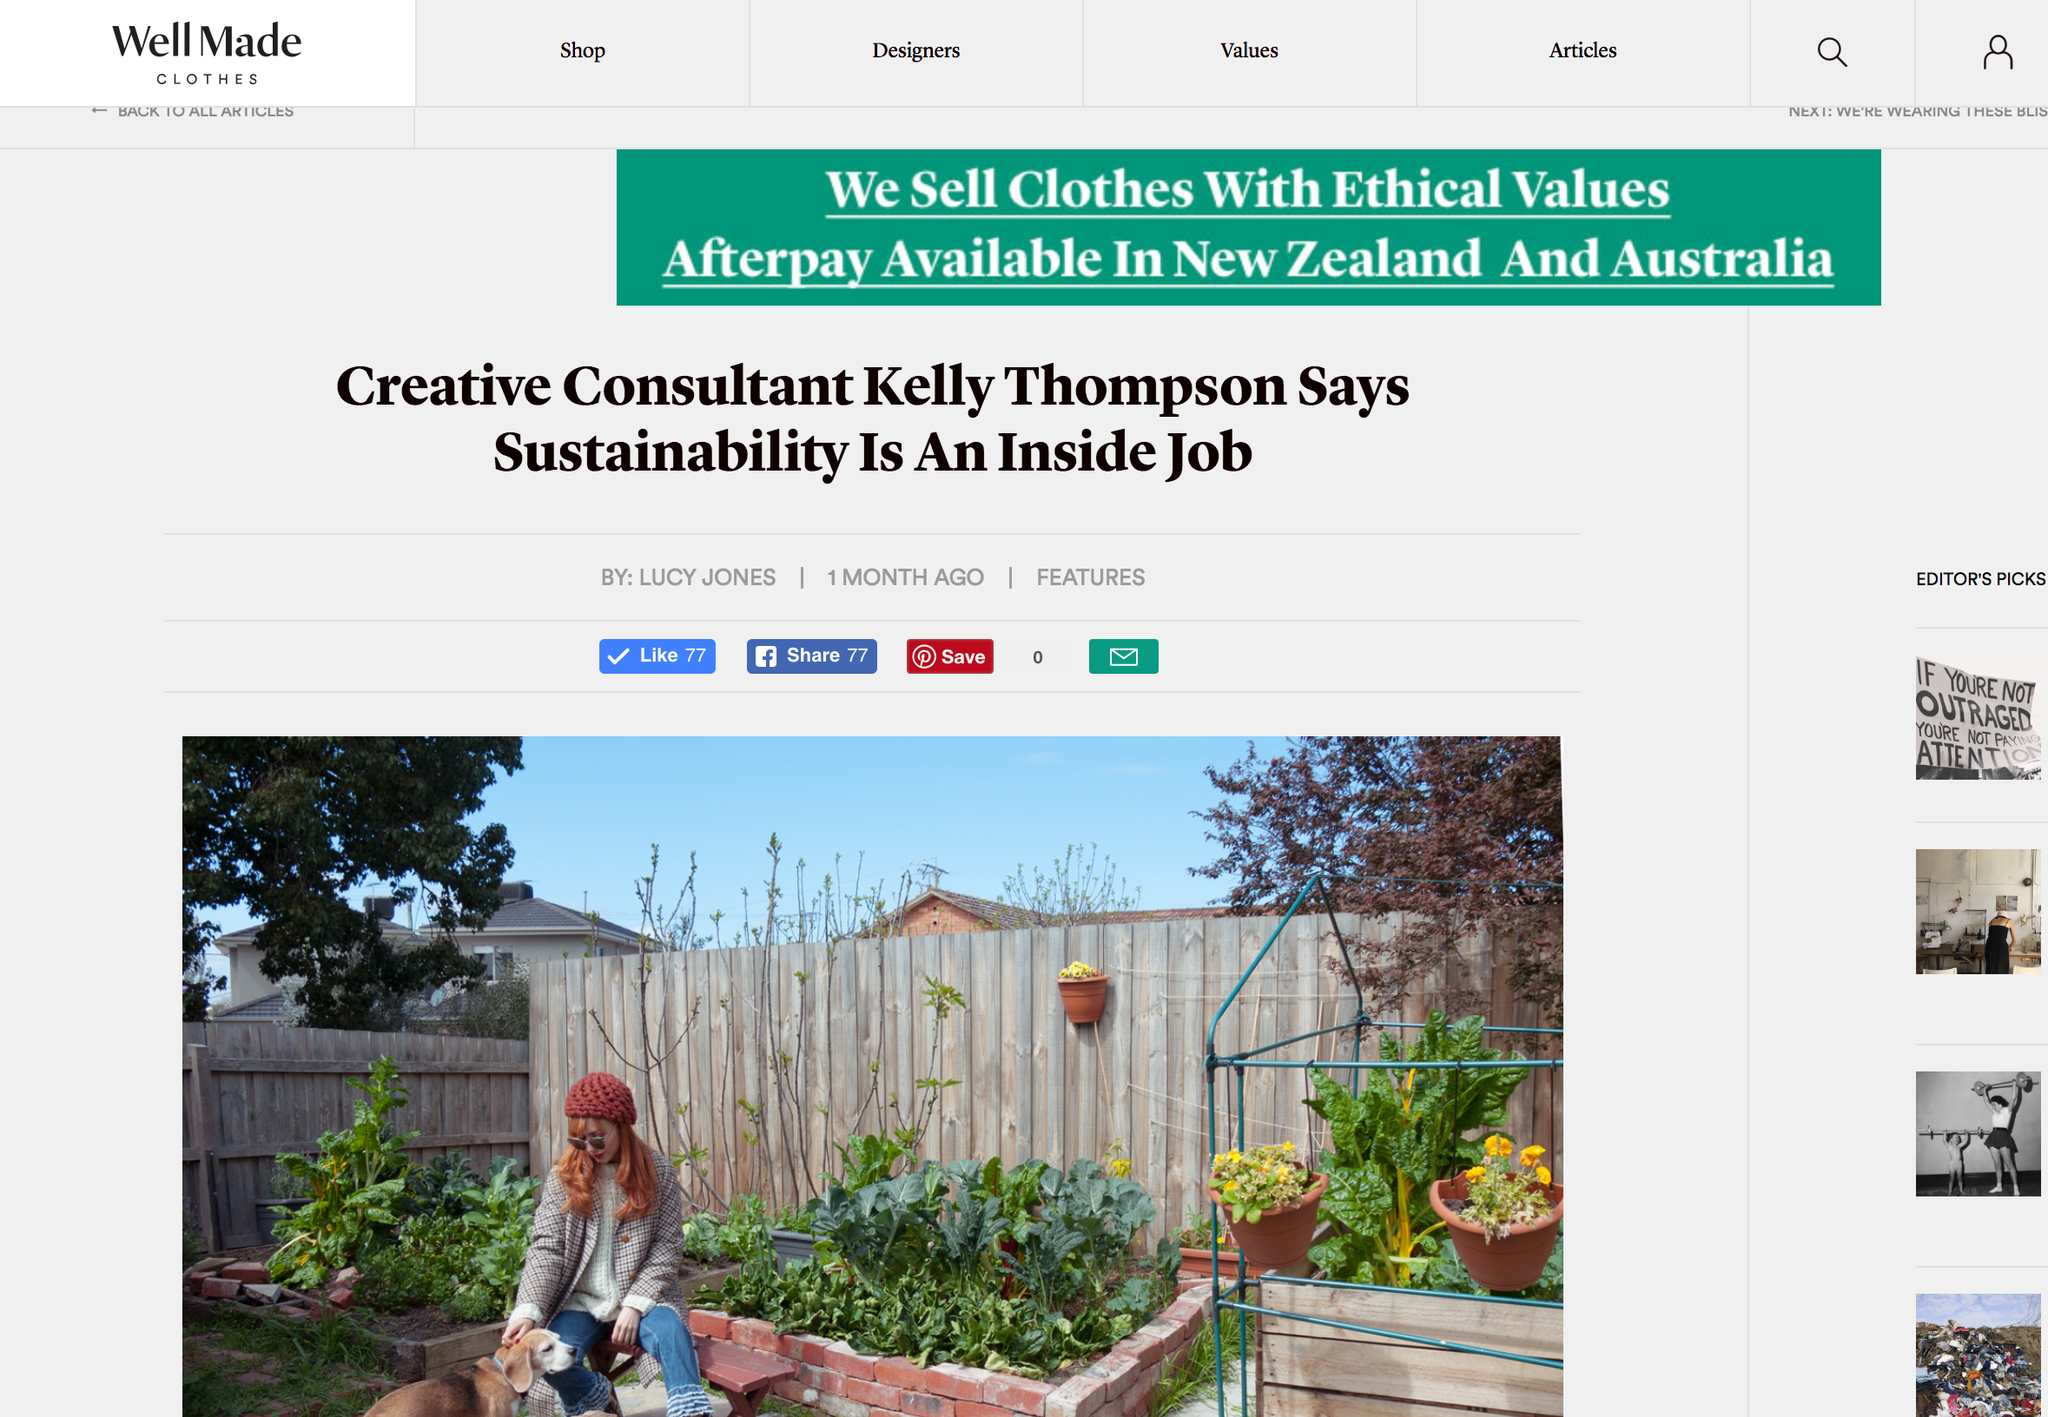 Illustrator Kelly Thompson Melbourne Garden Sustainability vegetable patch Well Made Clothes